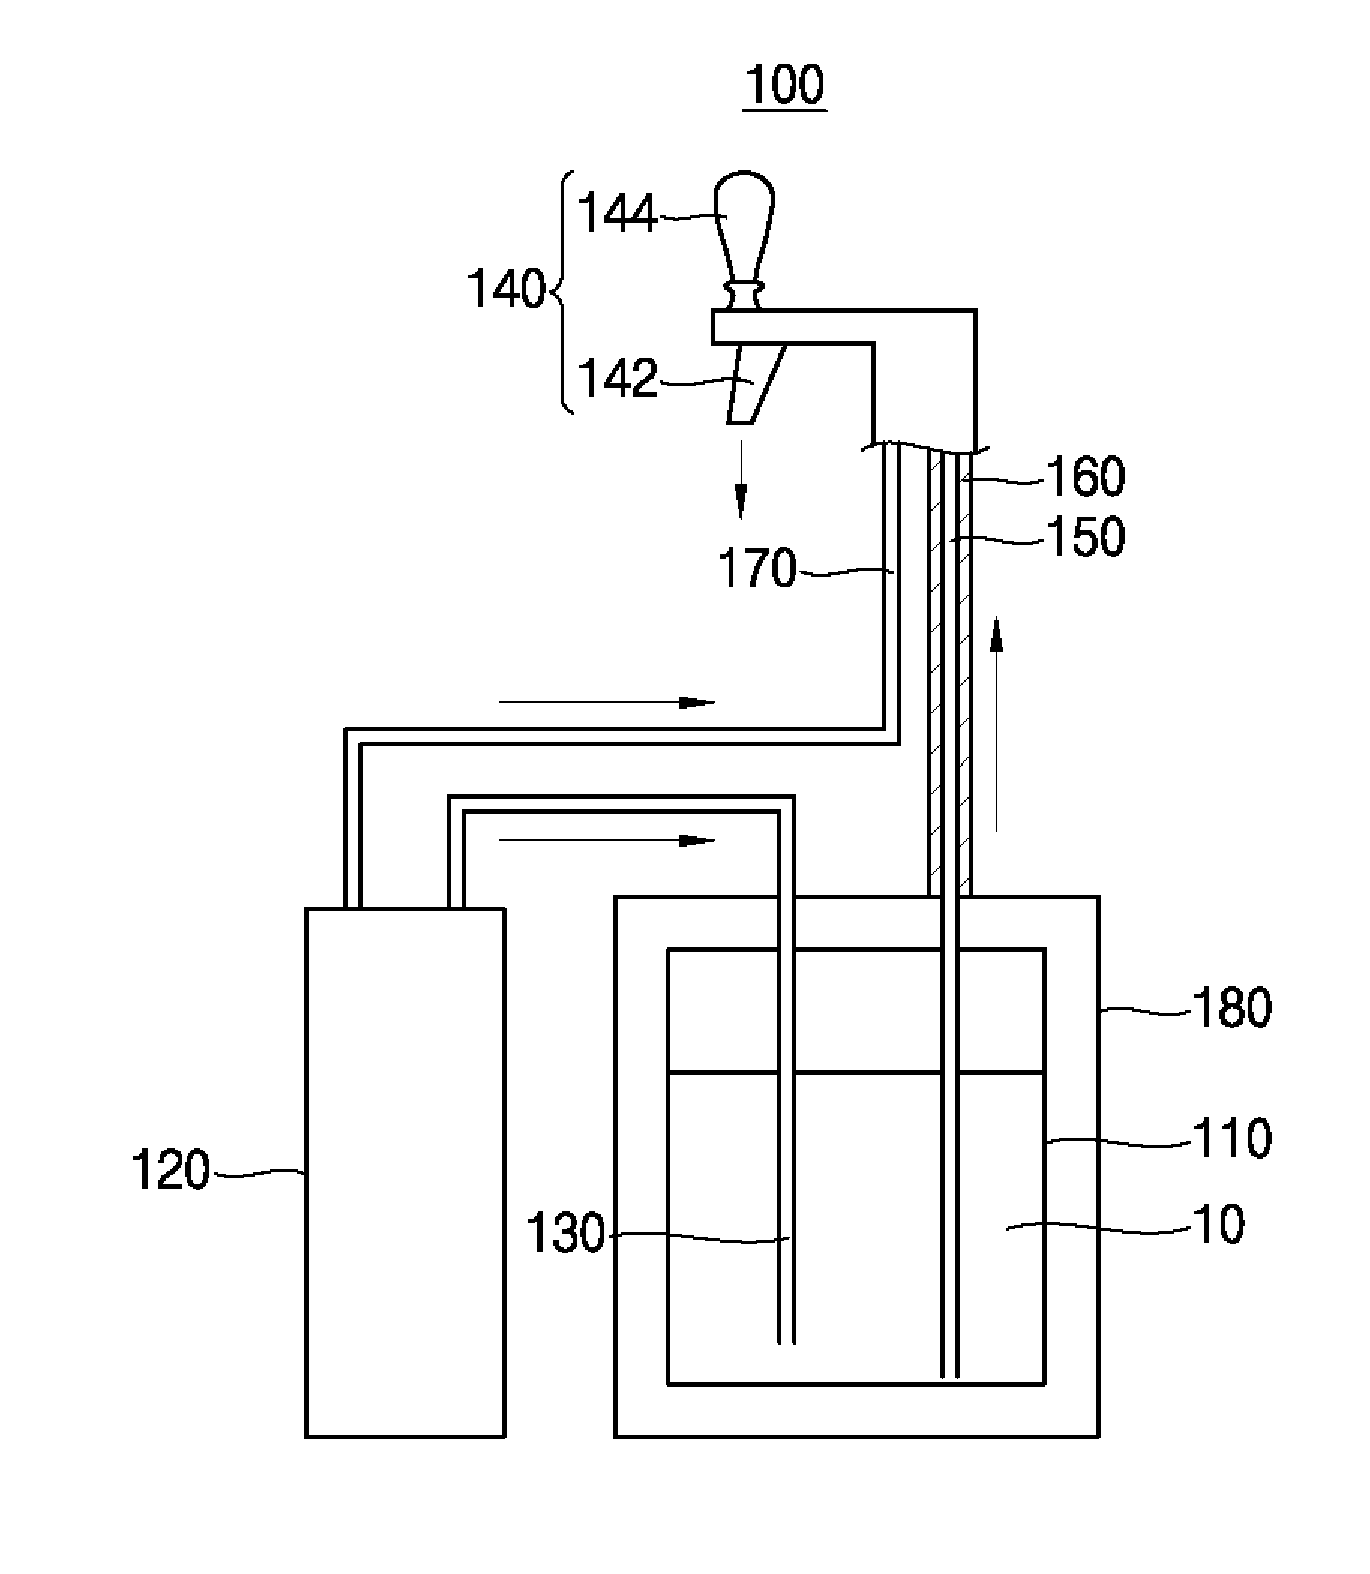 Method of making coffe and apparatus of making coffee